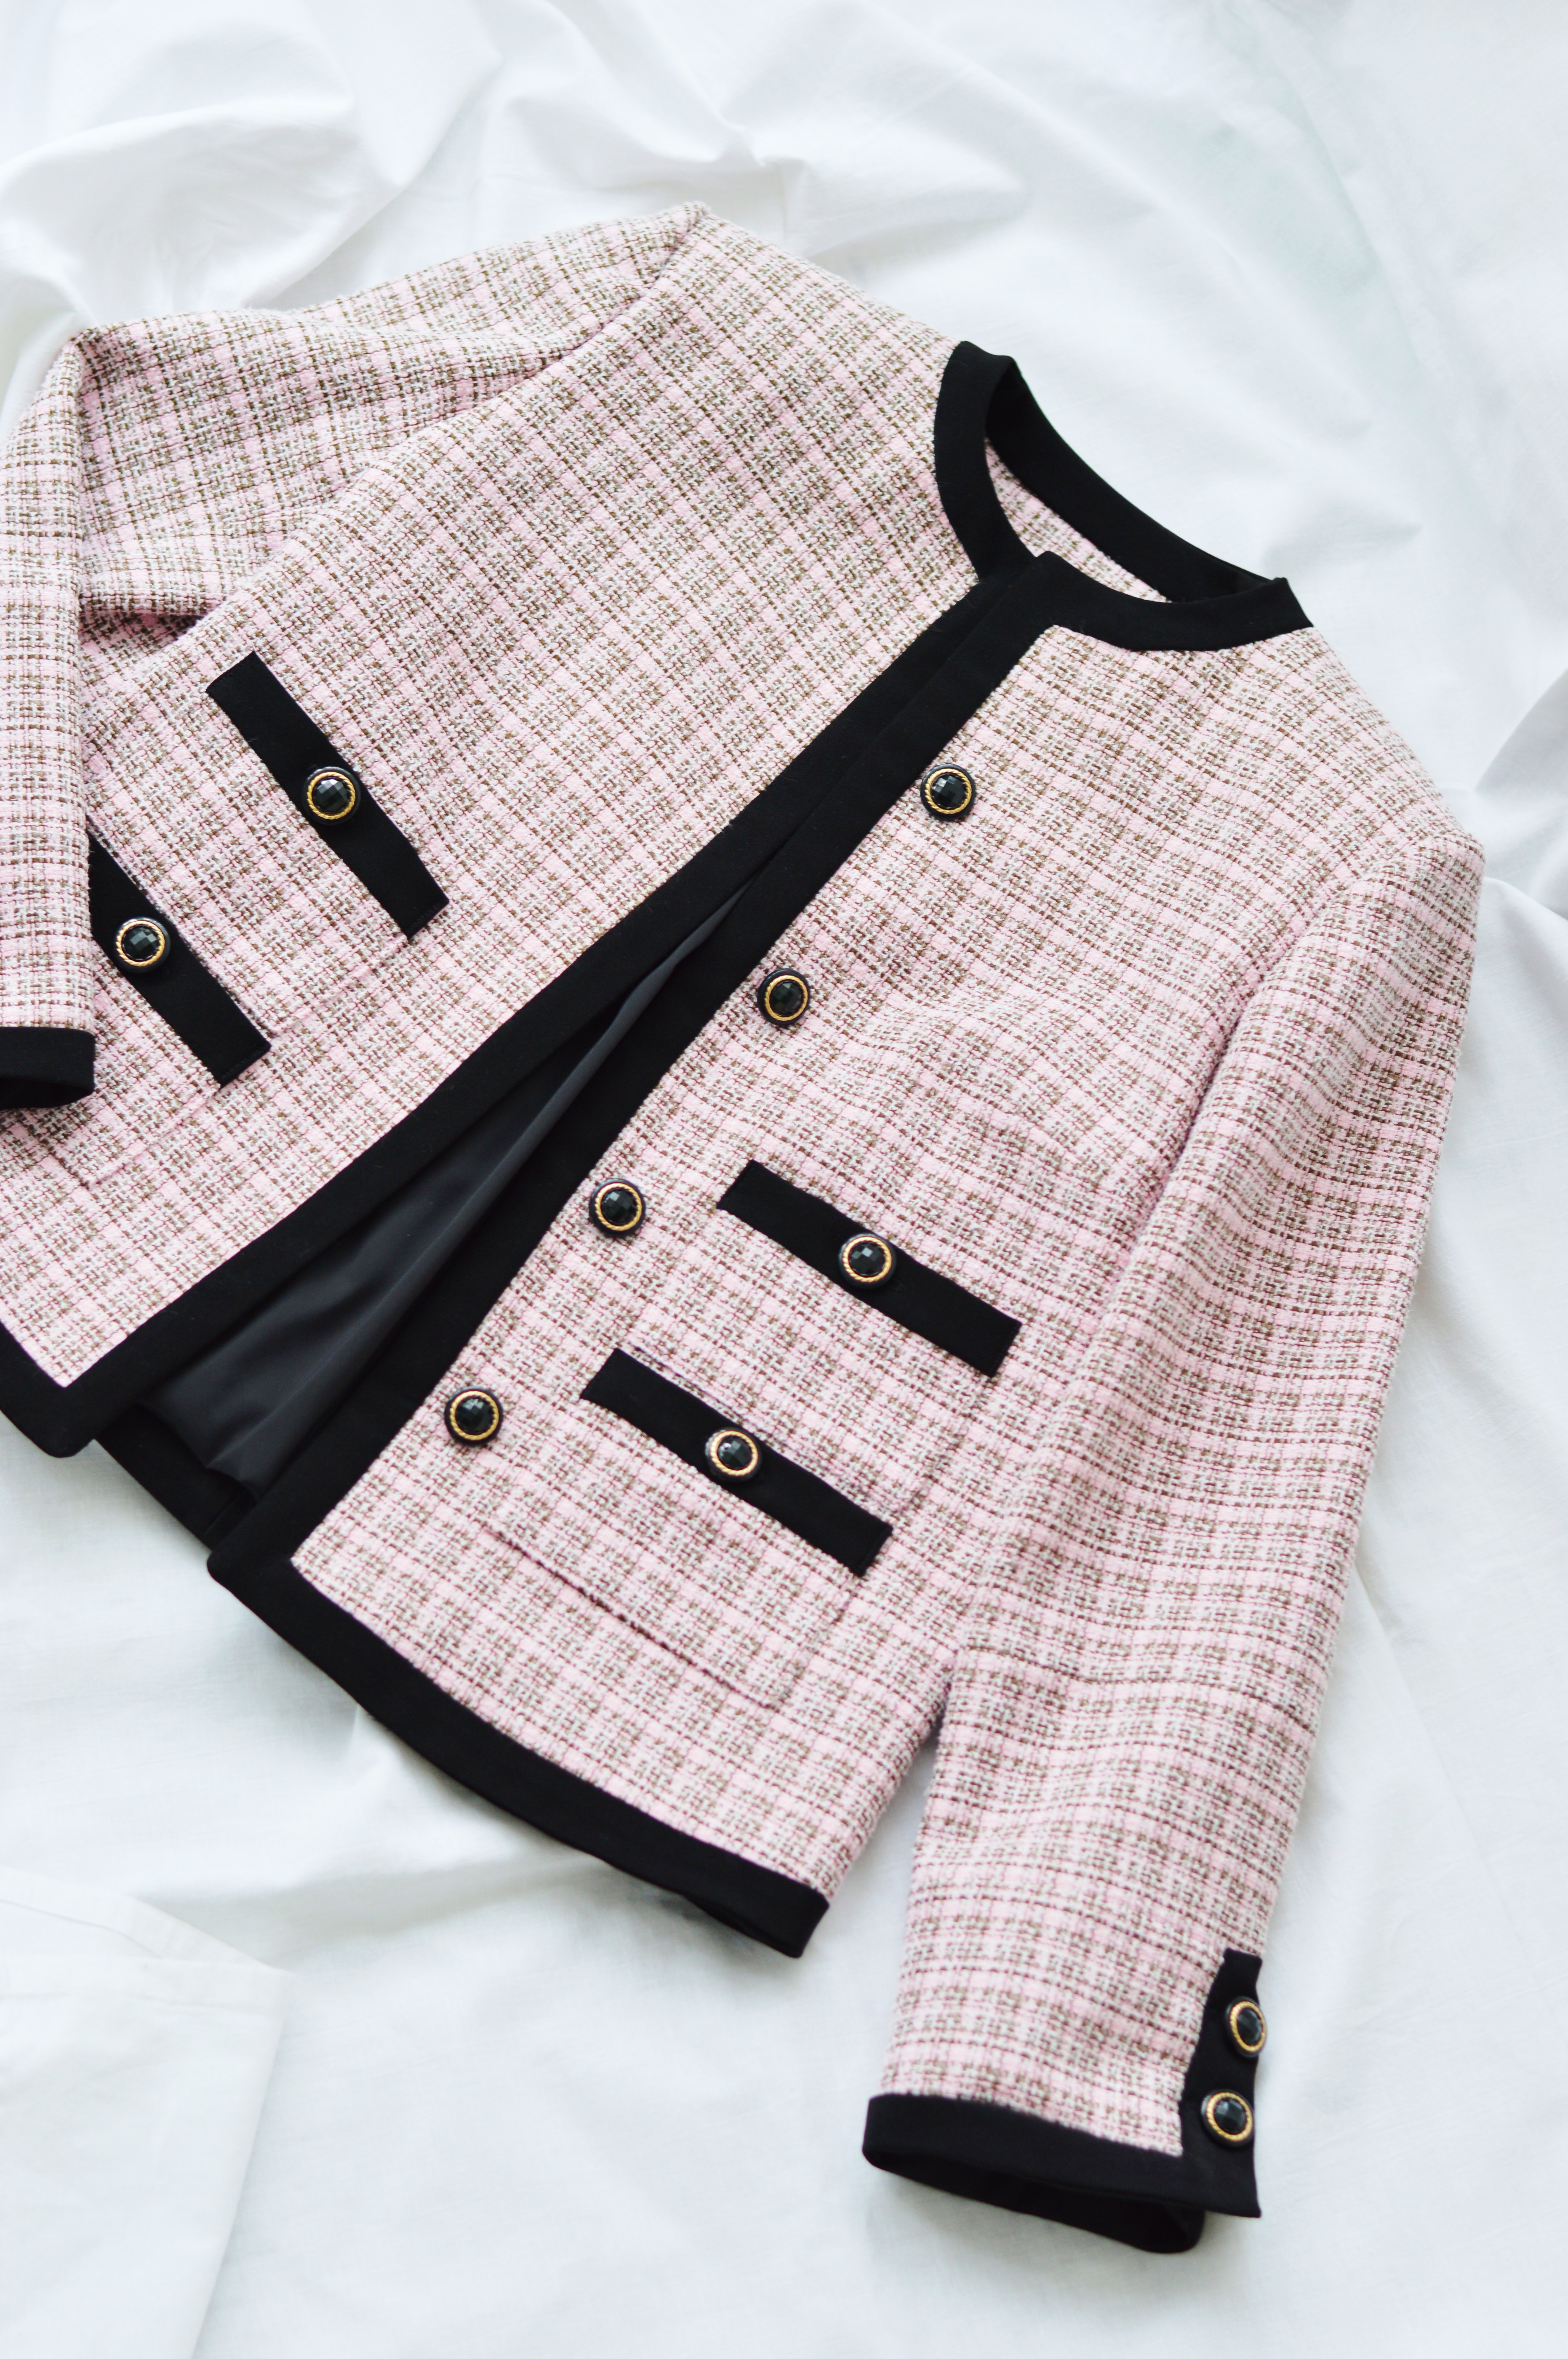 CLASSIC CHANEL JACKET – Sewing Projects | BurdaStyle.com